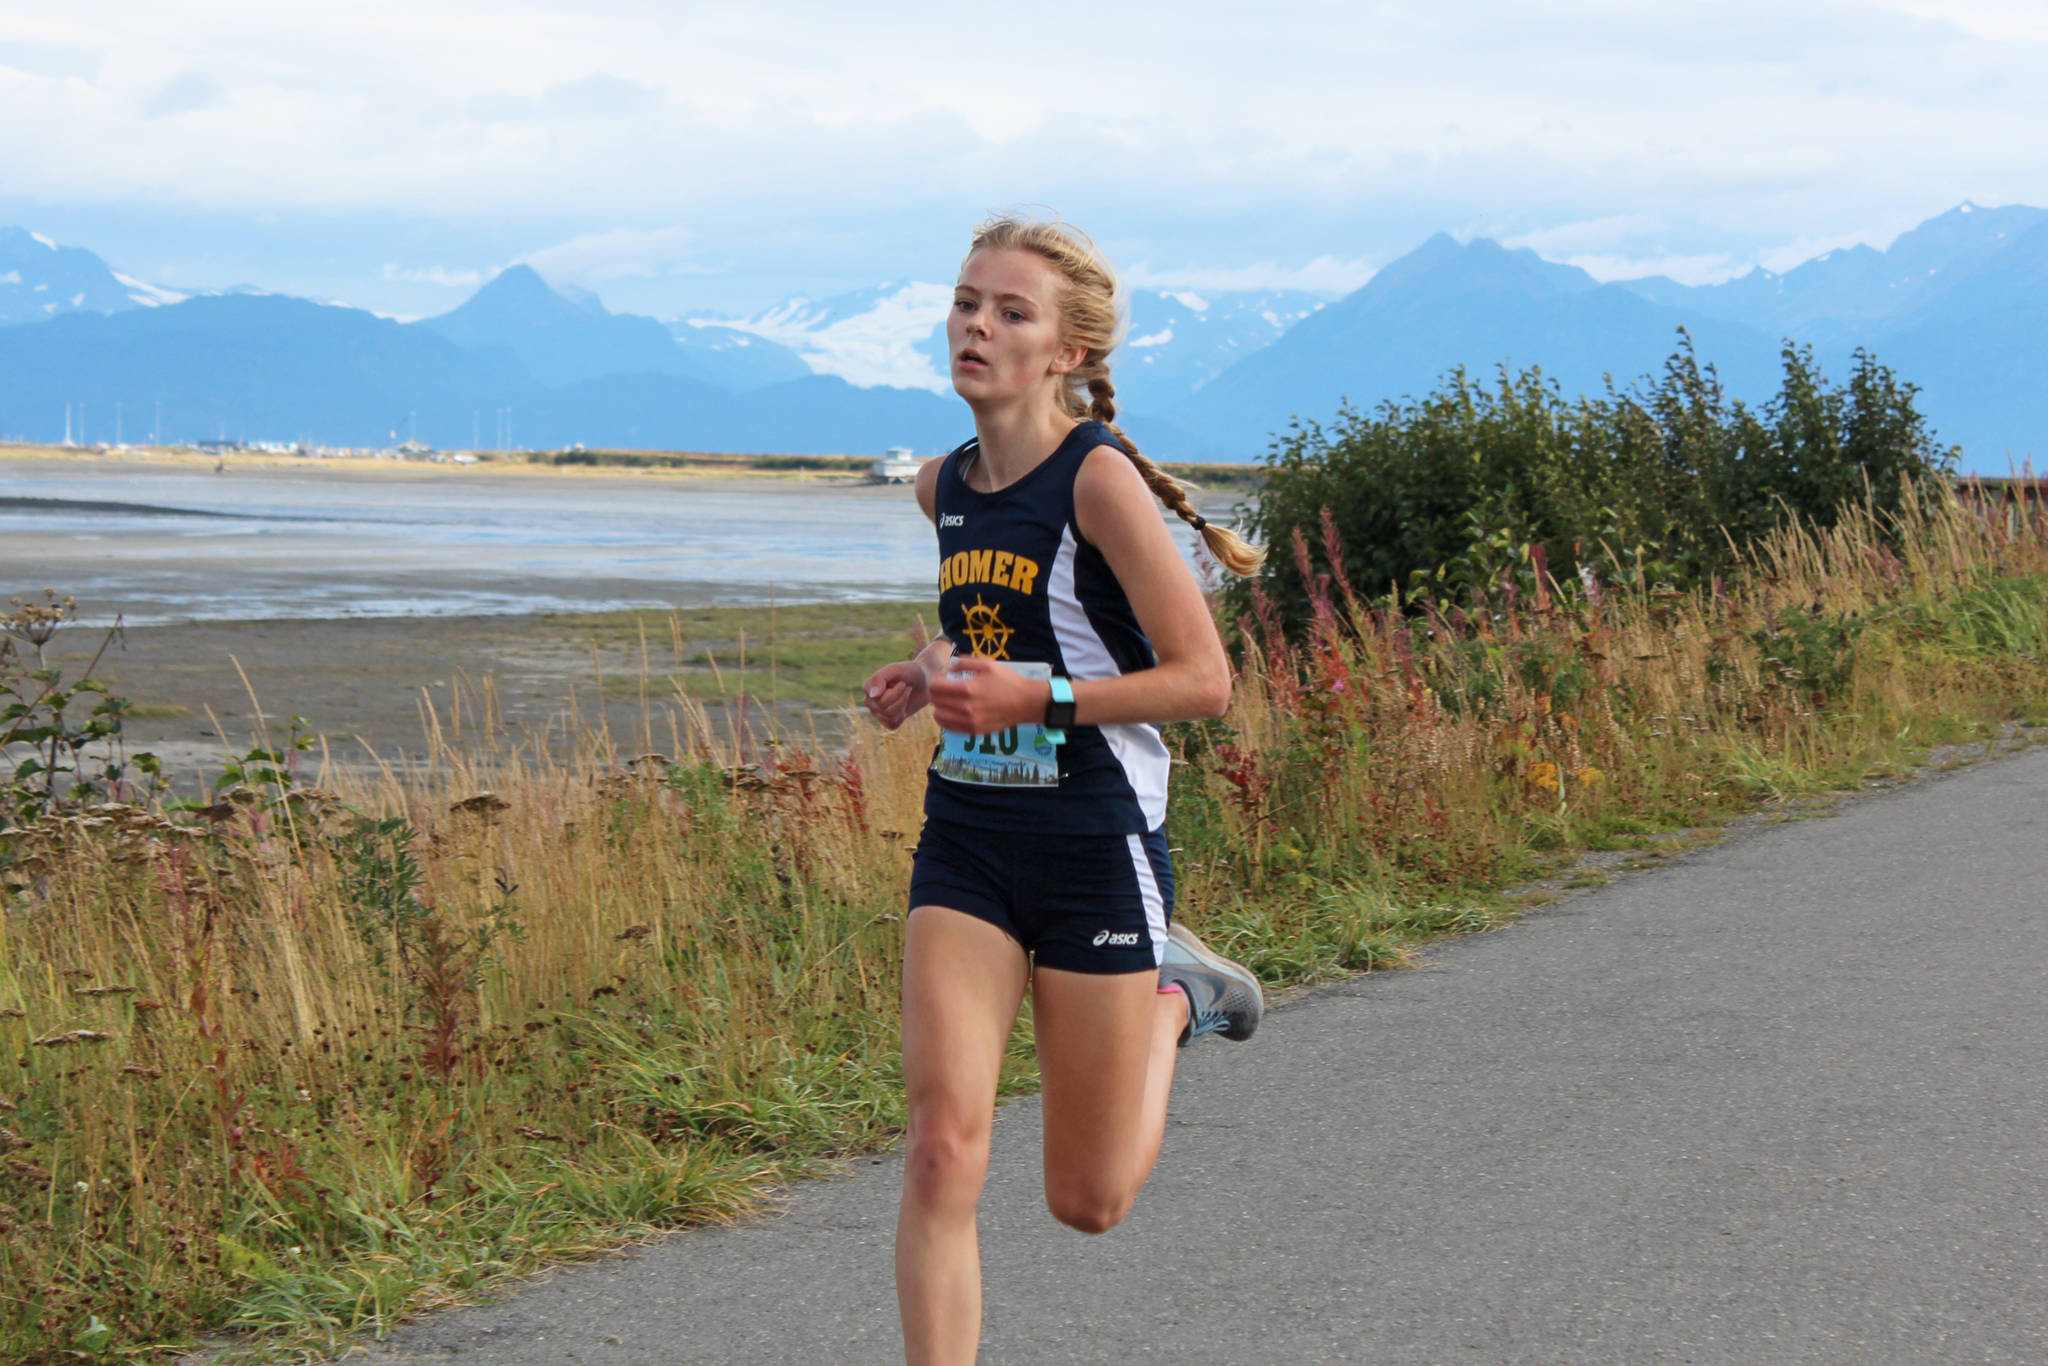 Homer sophomore Brooke Miller crosses the finish line of the girls 5K race during the Homer Invitational for cross-country Friday, Sept. 7, 2018 on the Homer Spit in Homer, Alaska. Miller and teammate Autumn Daigle took the top two spots in the varsity girls race. (Photo by Megan Pacer/Homer News)